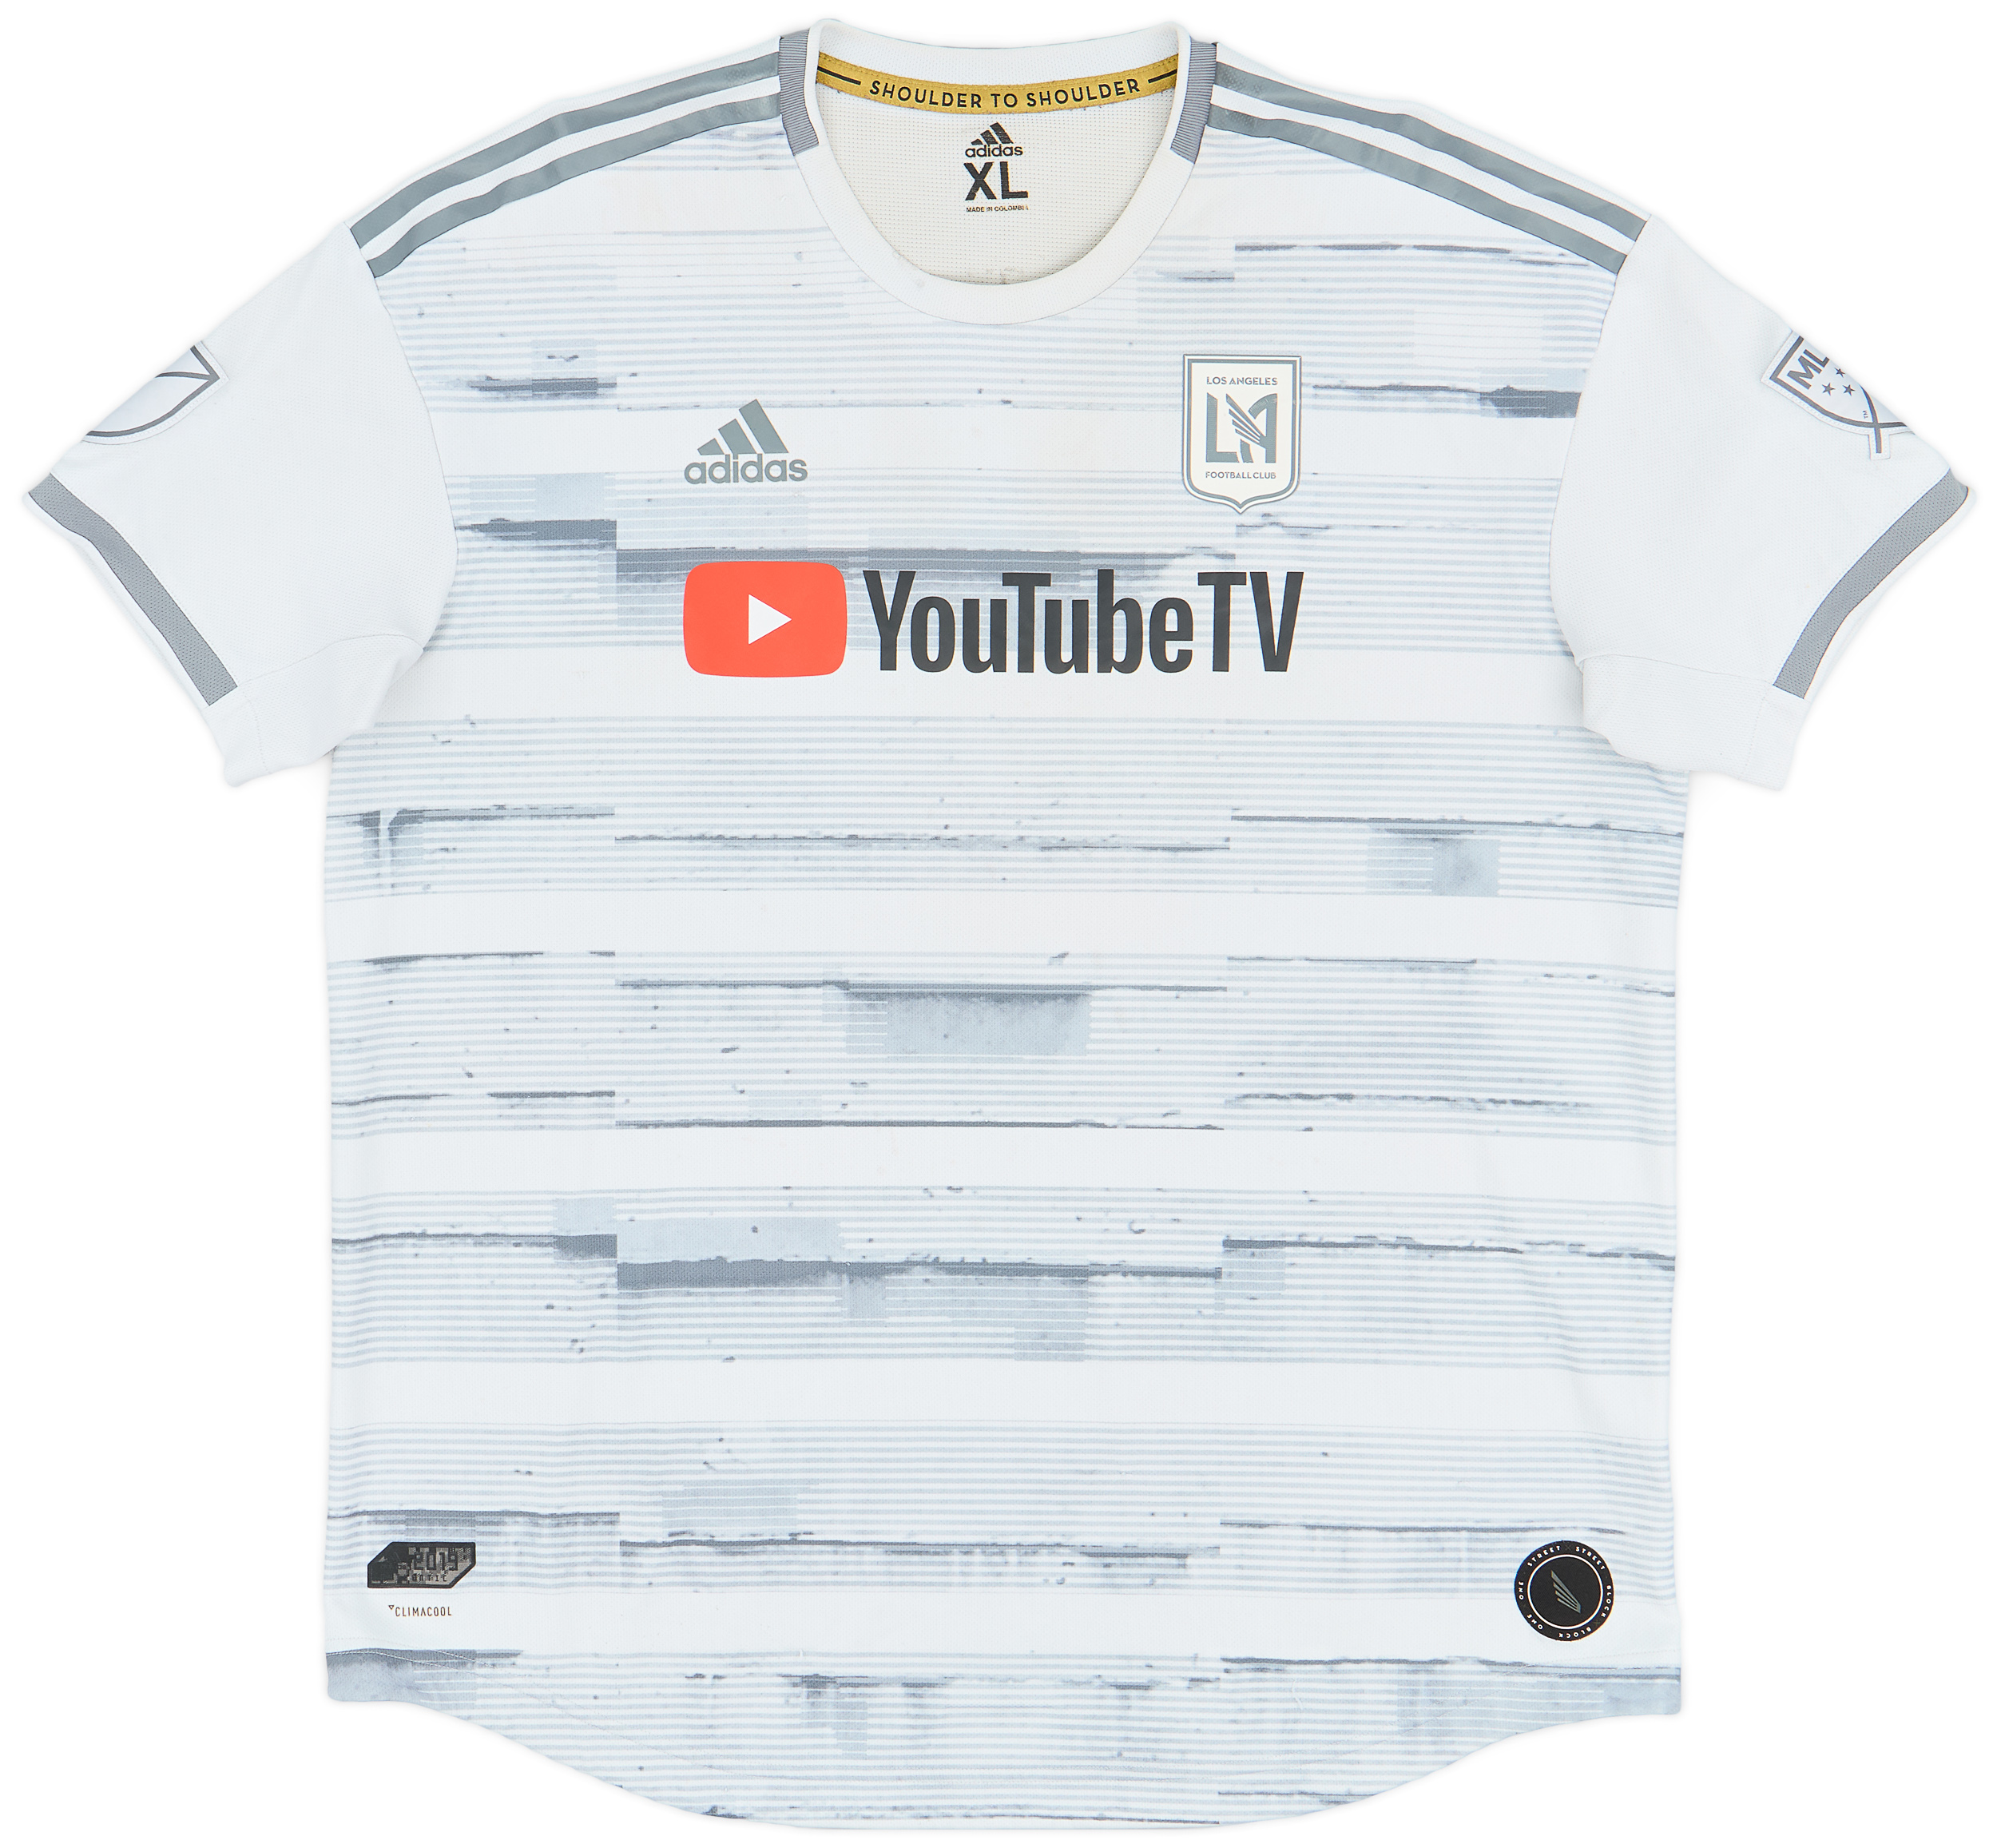 2019 Los Angeles FC Authentic Away Shirt - 6/10 - ()